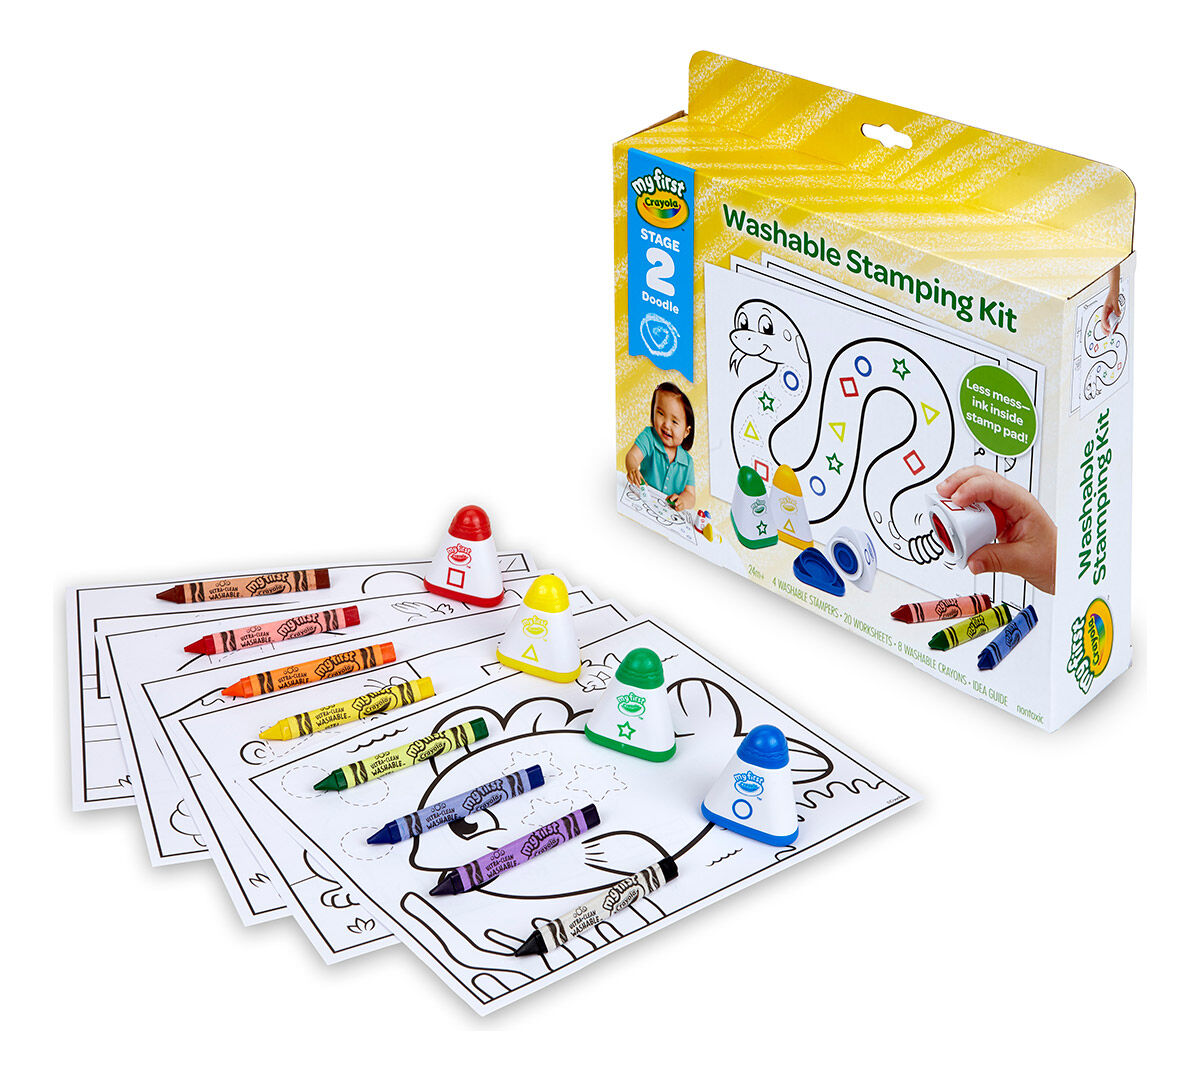 My First Crayola Washable Stamping Kit